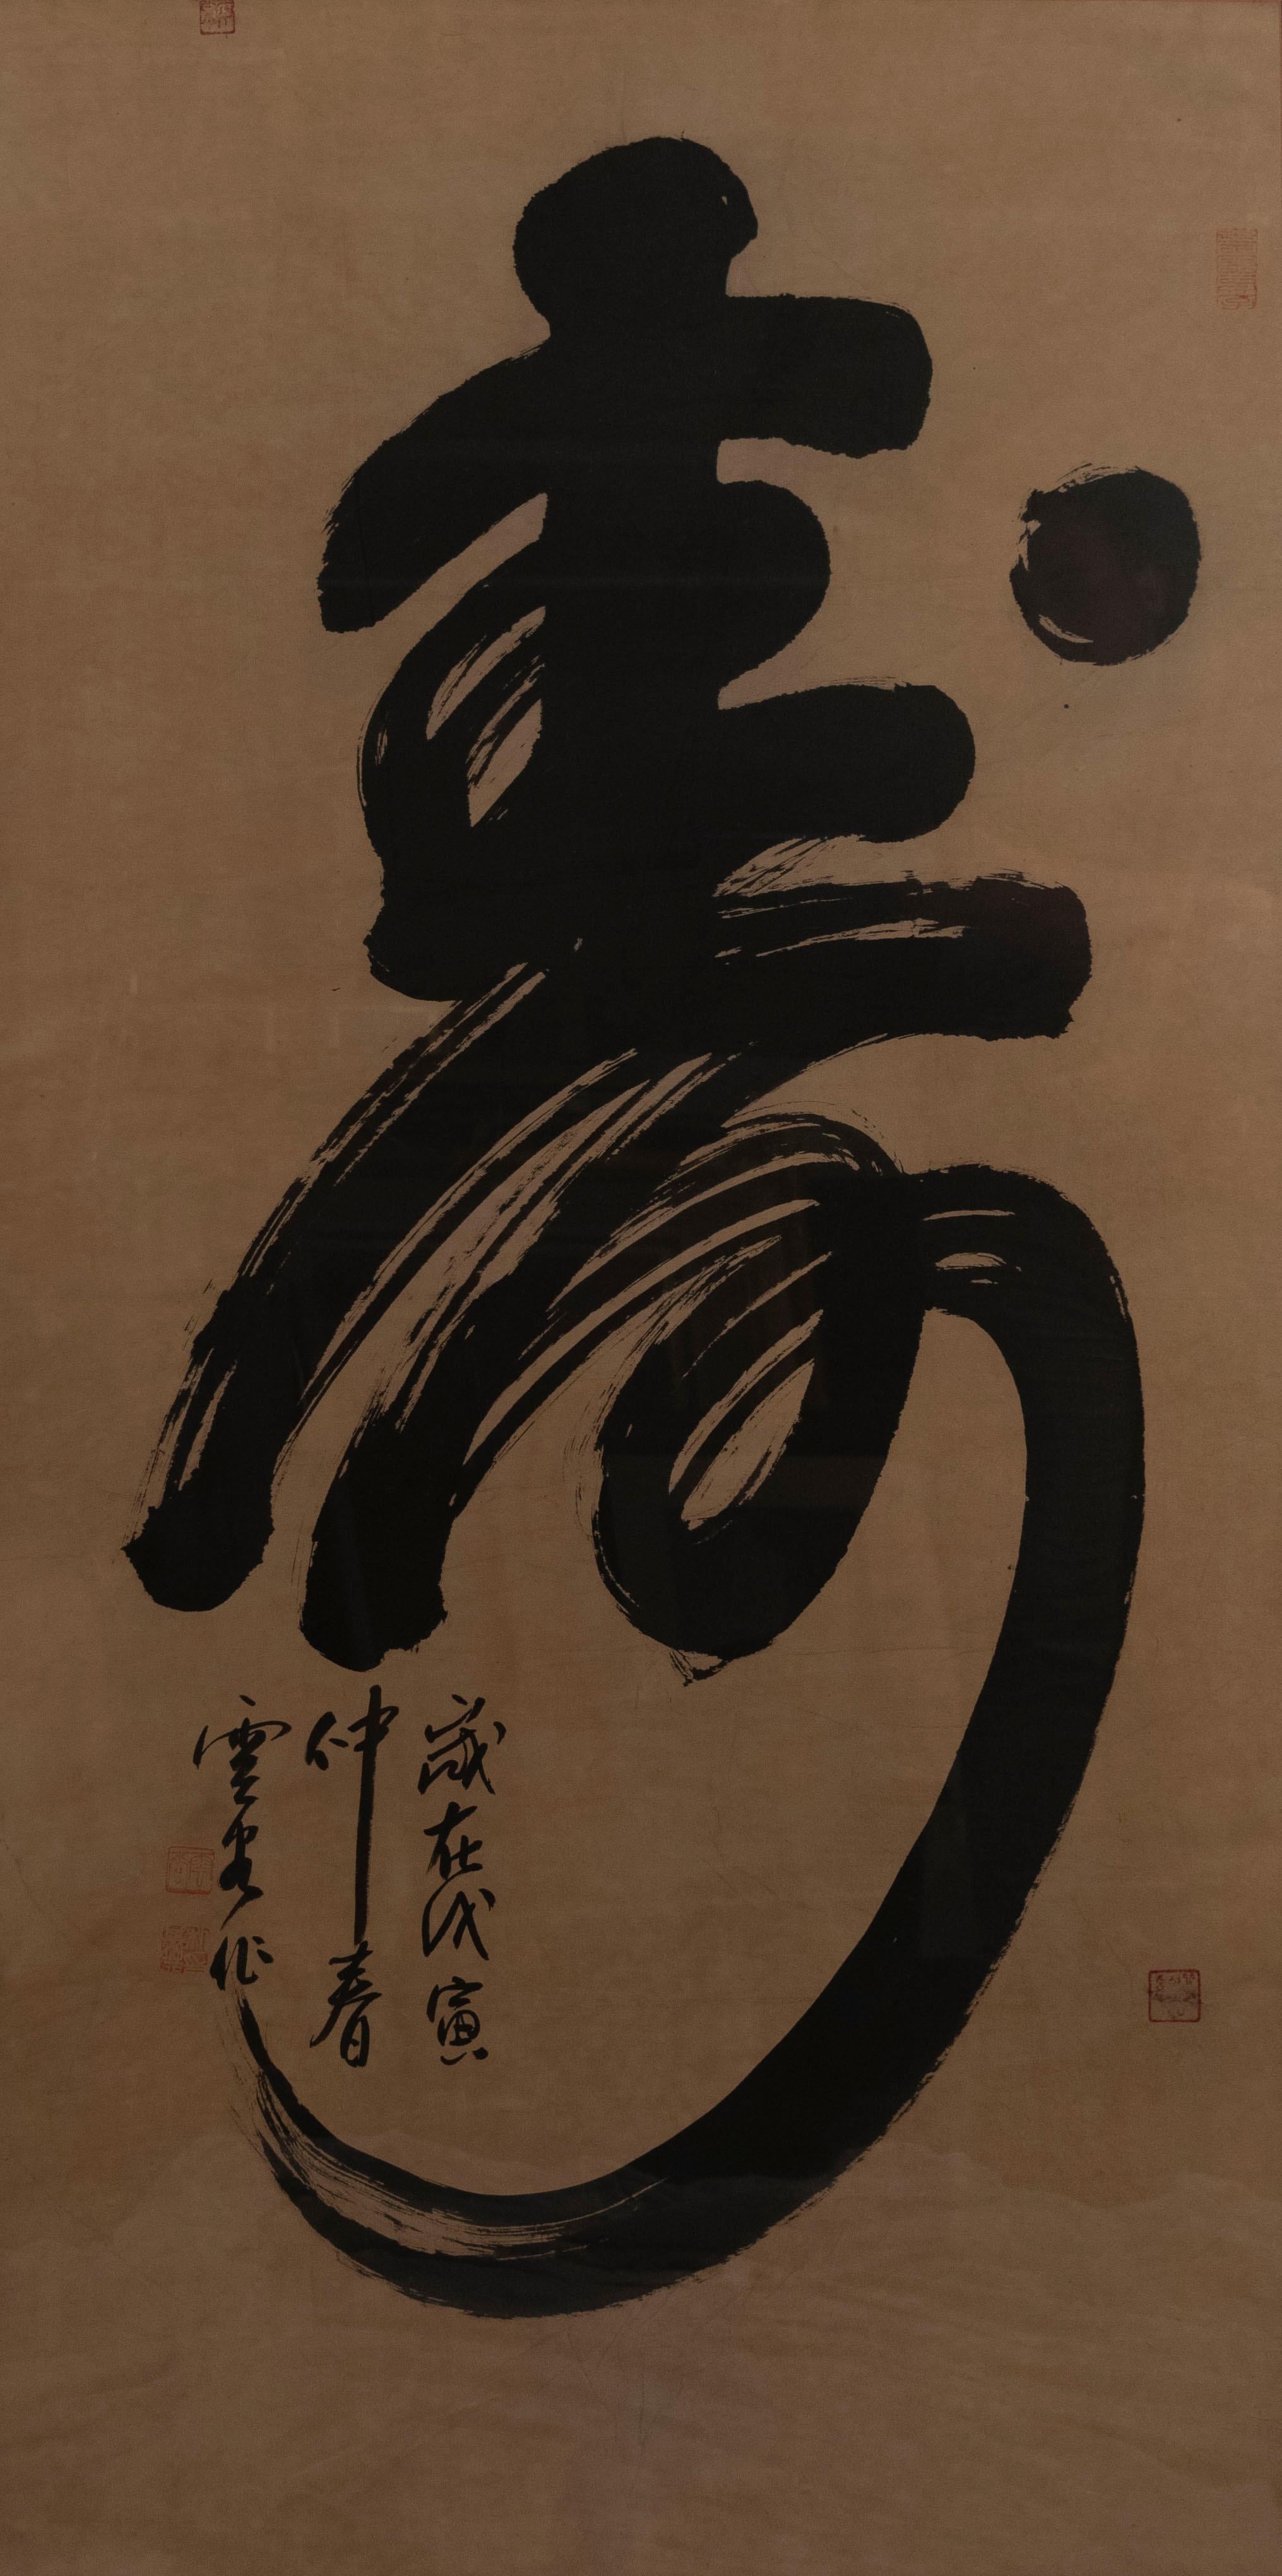 Large Japanese Shodo calligraphy painting (circa 1940)

Measures: 58 x 32 inches.